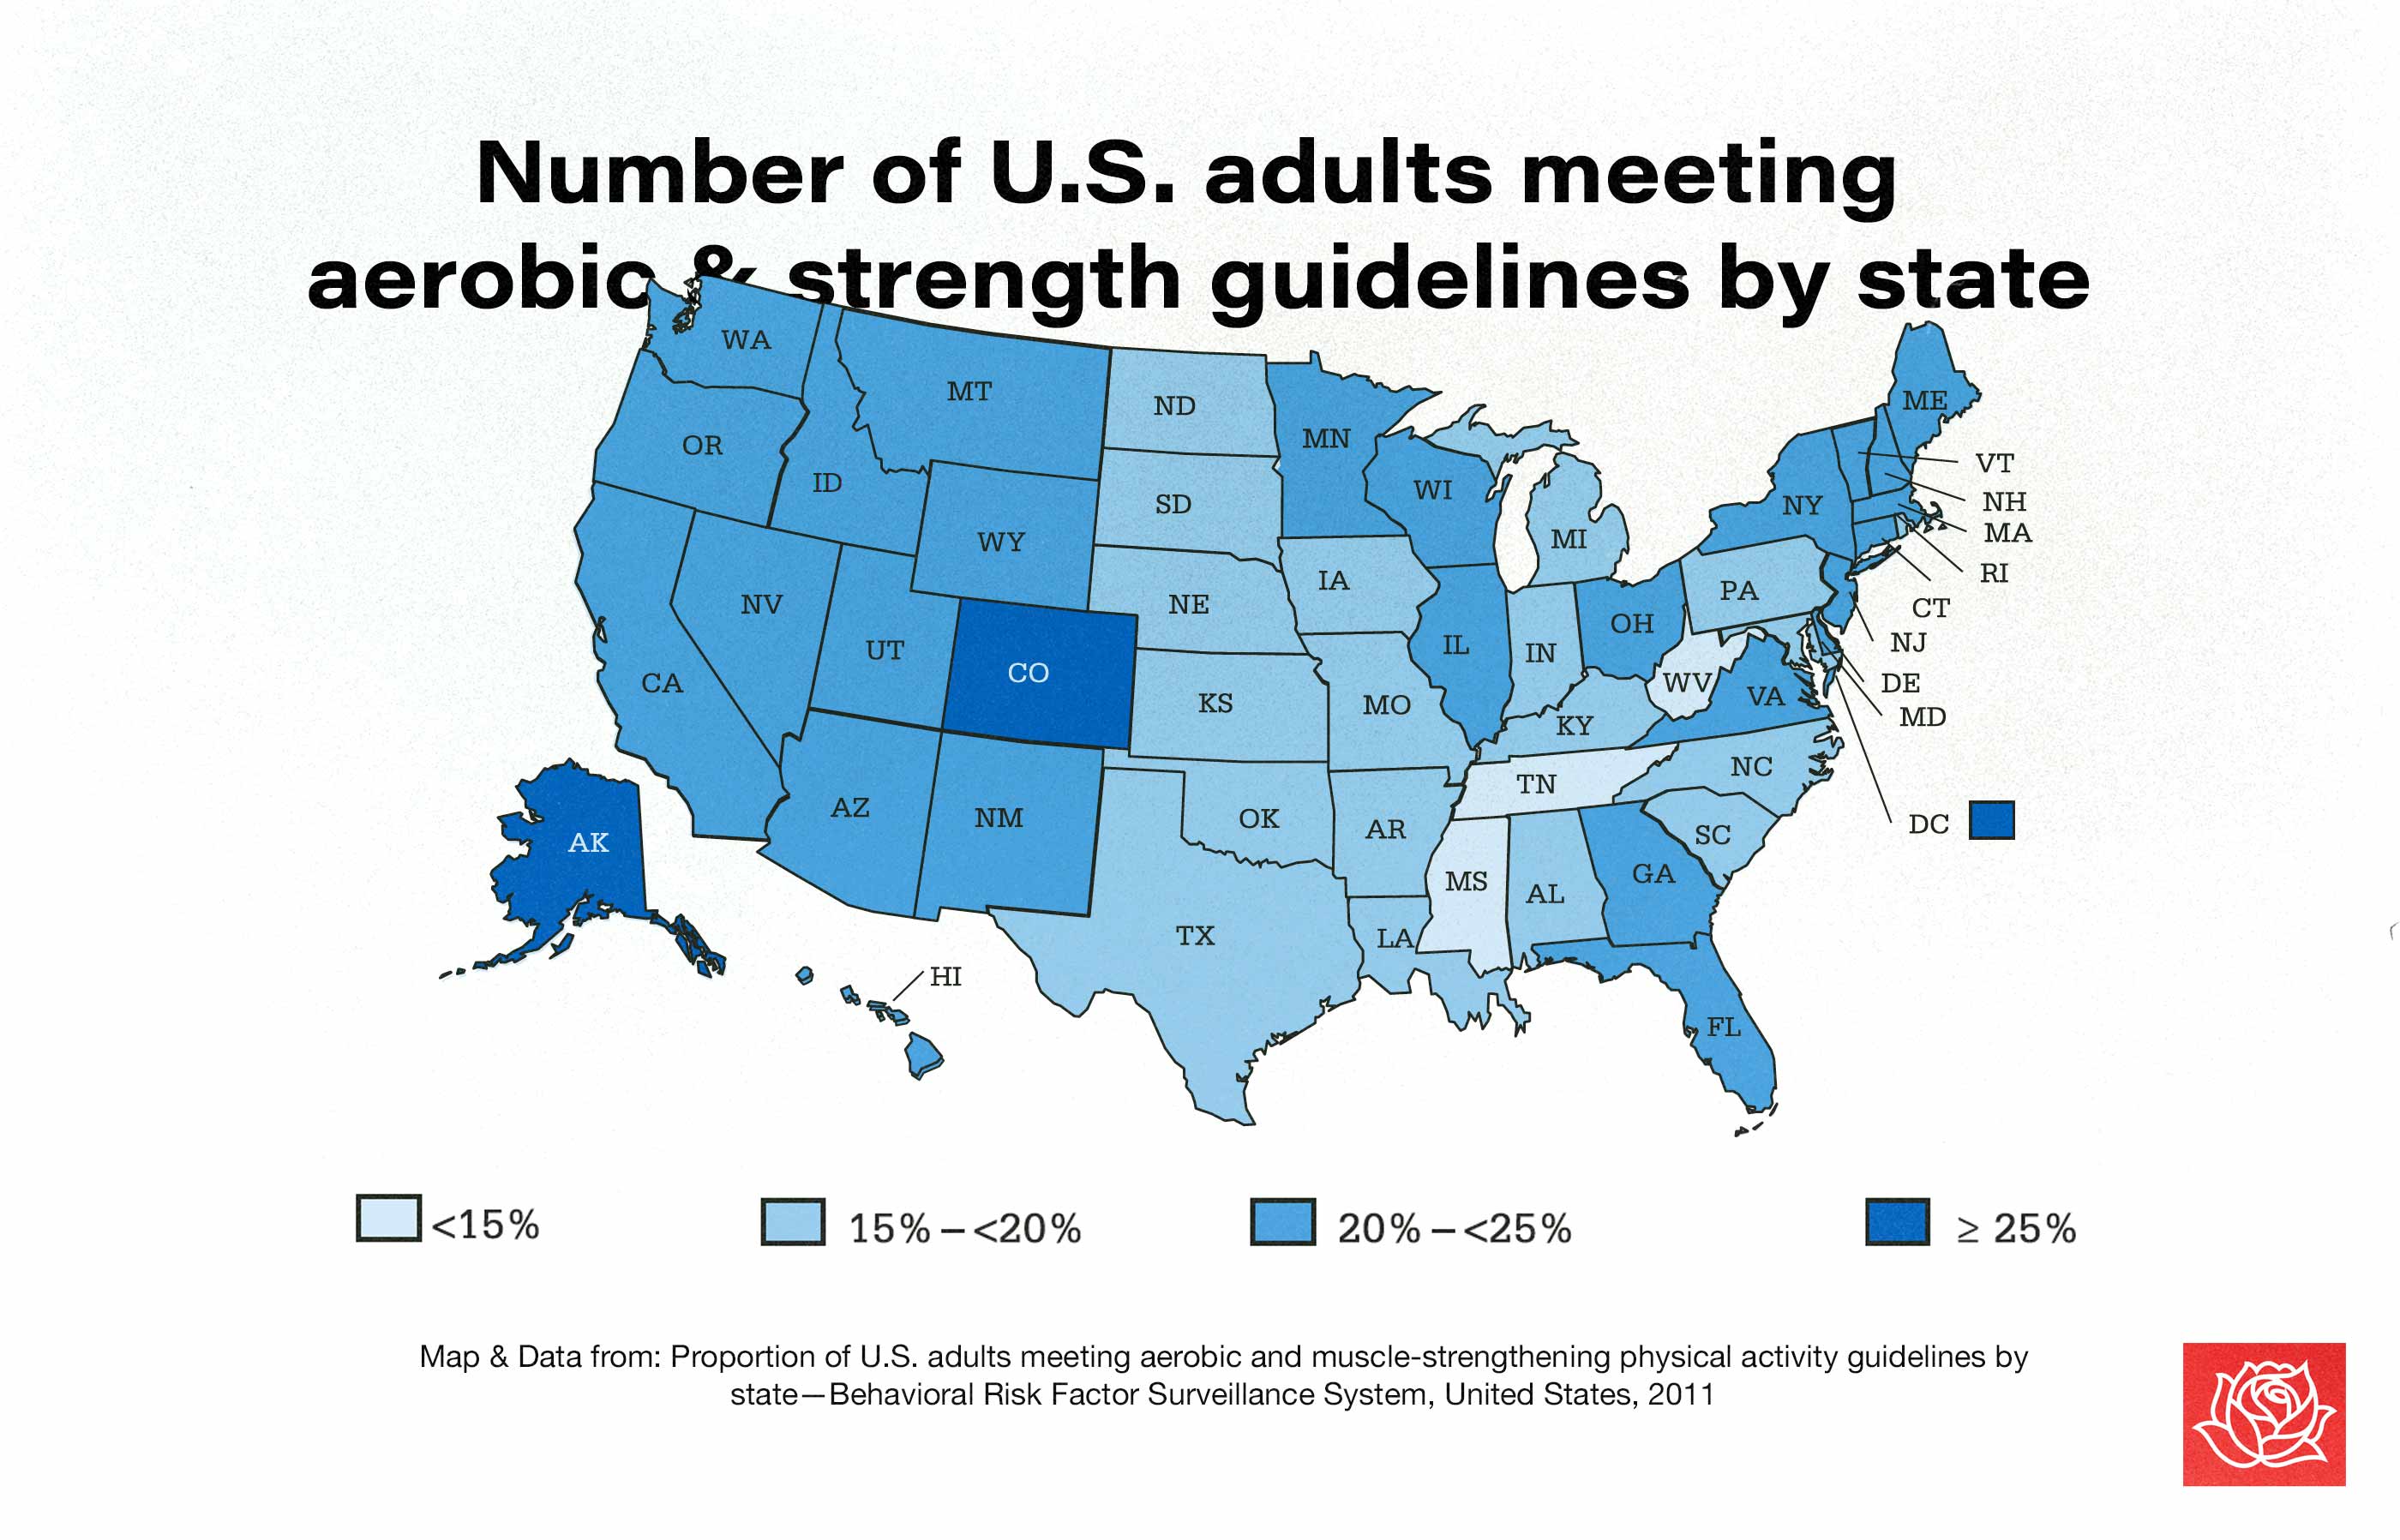 A Map of how many men and women in the US are meeting the aerobic/cardio and strength guidelines. Organized by state.